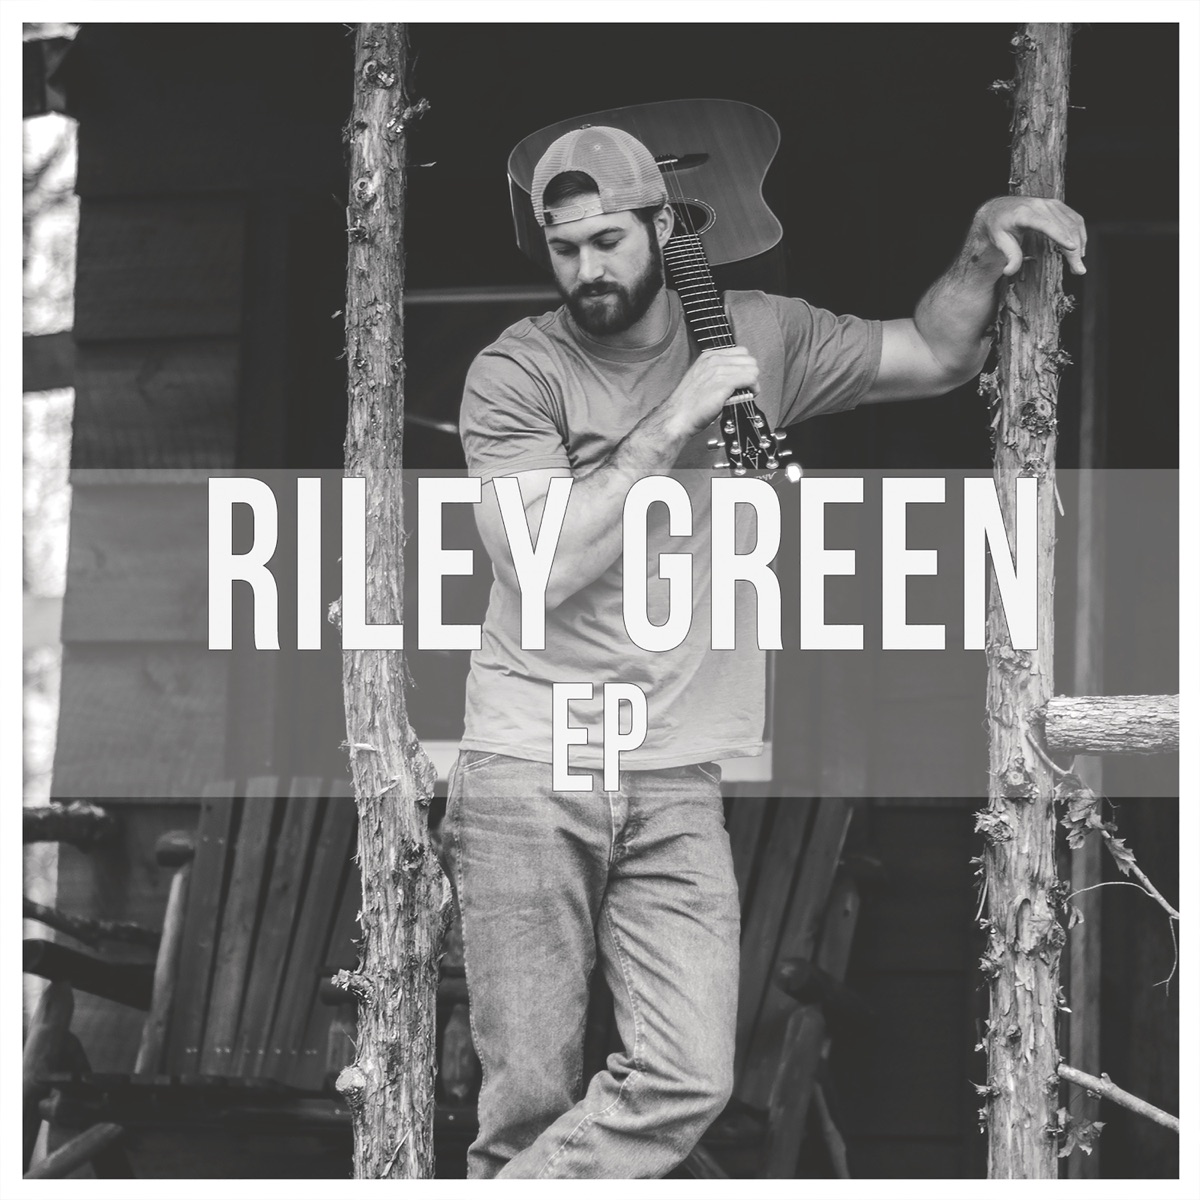 Exclusive: Riley Green Talks New Single, 'Mississippi Or Me